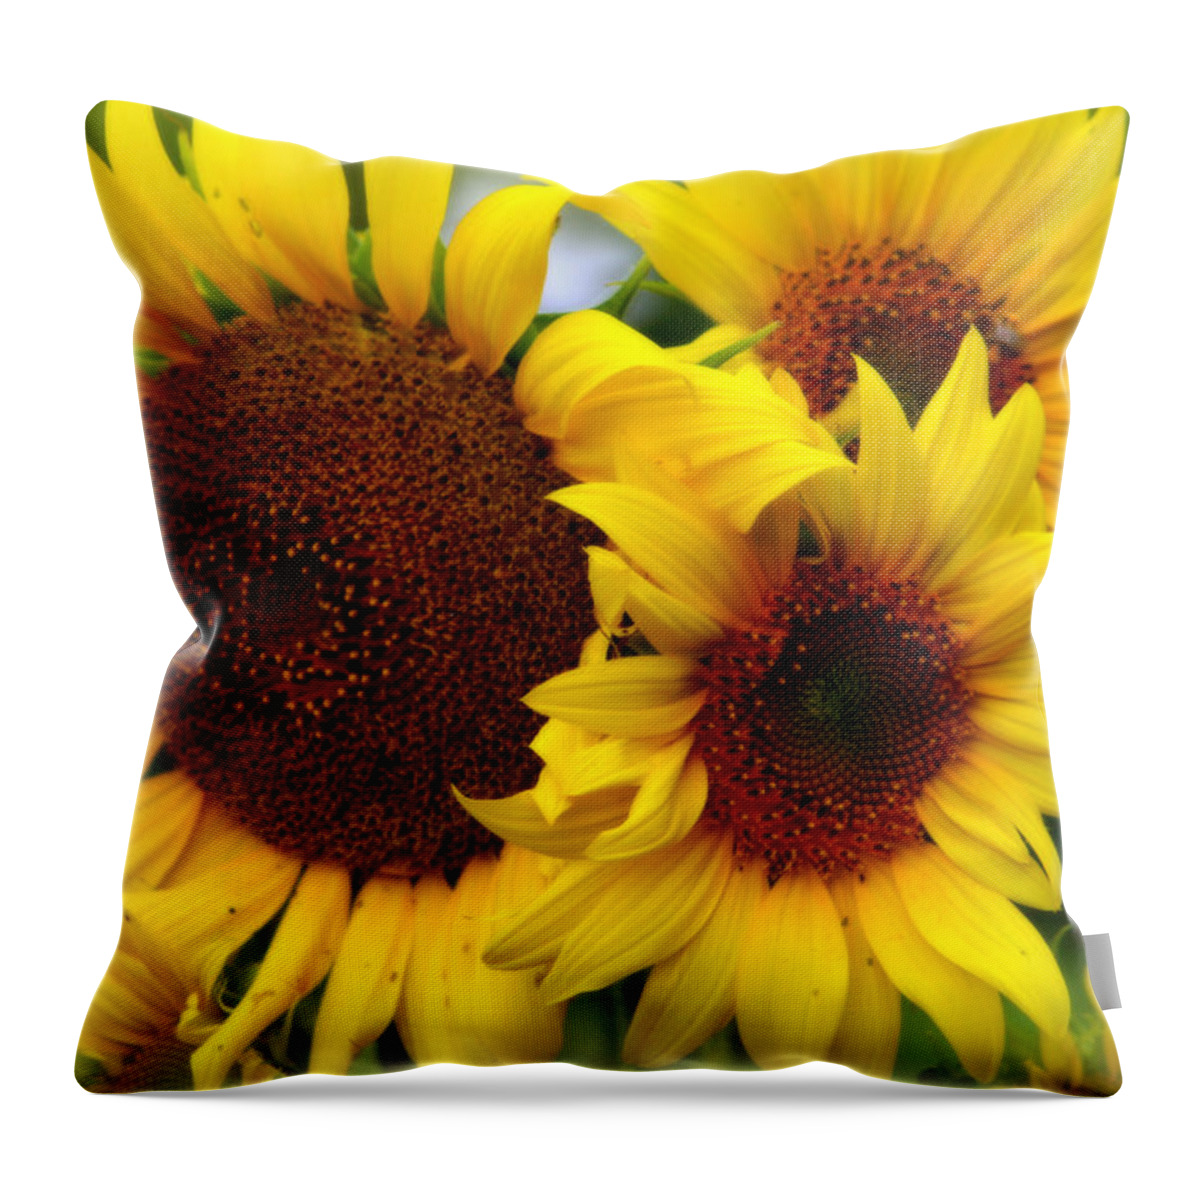 Nature Throw Pillow featuring the photograph Happy Sunflowers by Kay Novy